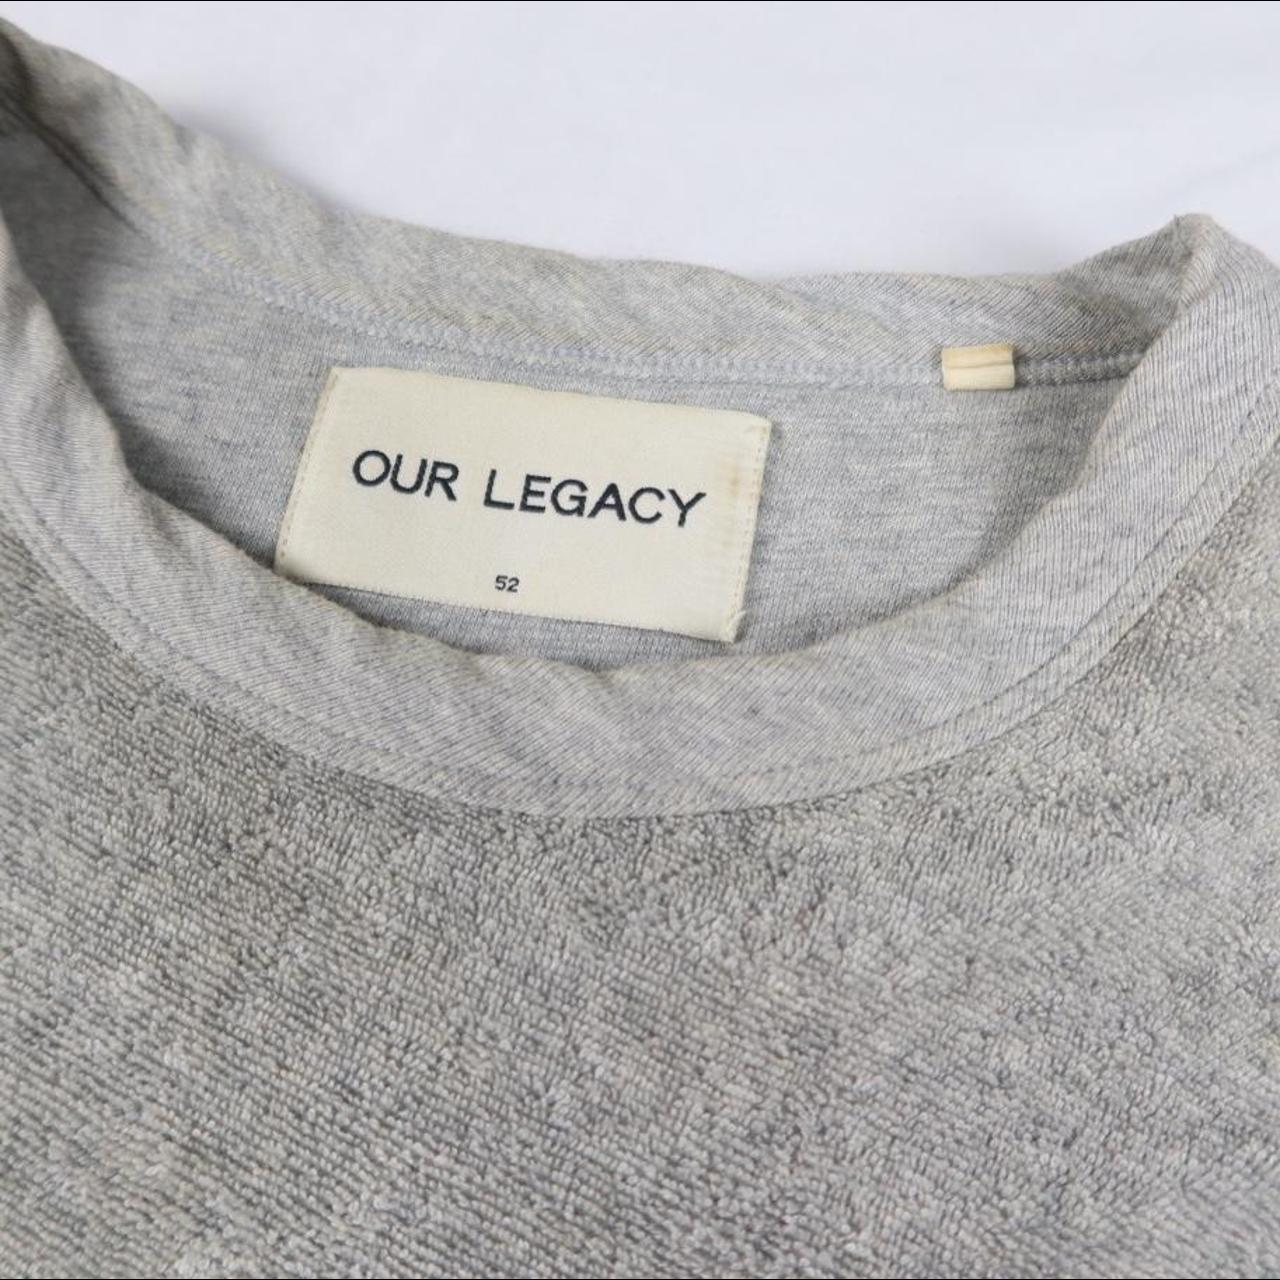 Product Image 3 - Our legacy towel fabric t